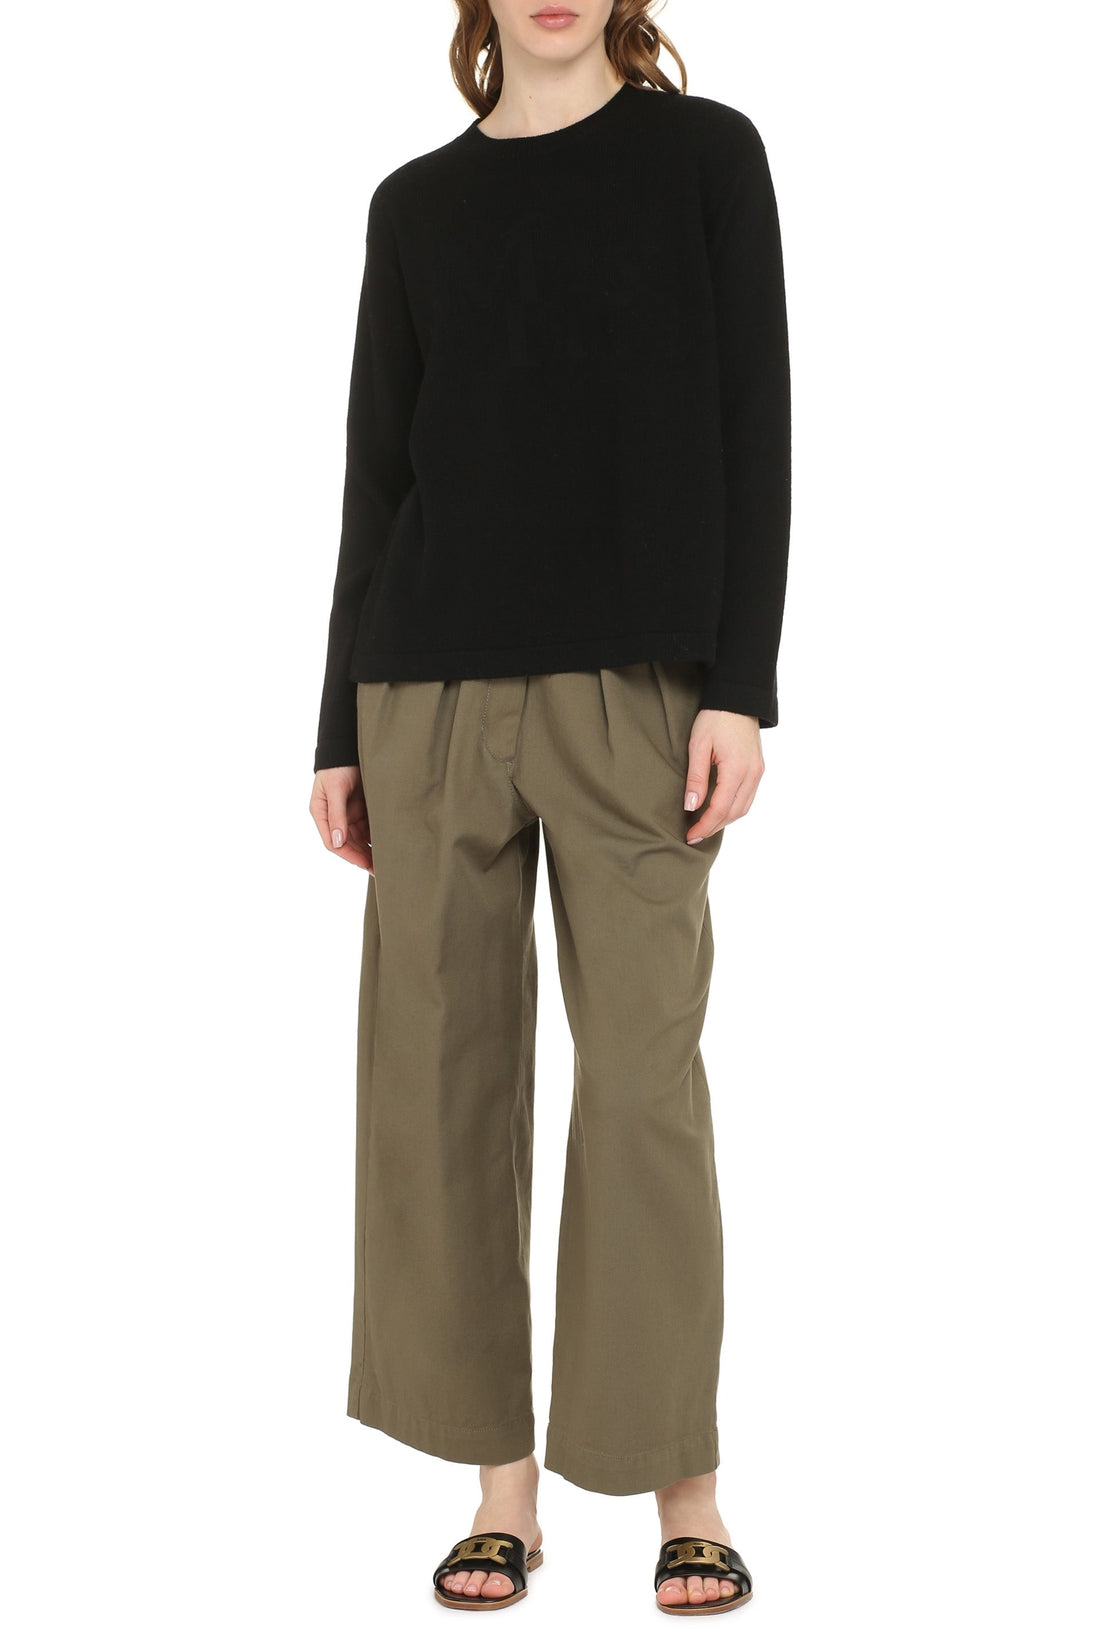 S MAX MARA-OUTLET-SALE-Amalfi wool and cashmere pullover-ARCHIVIST